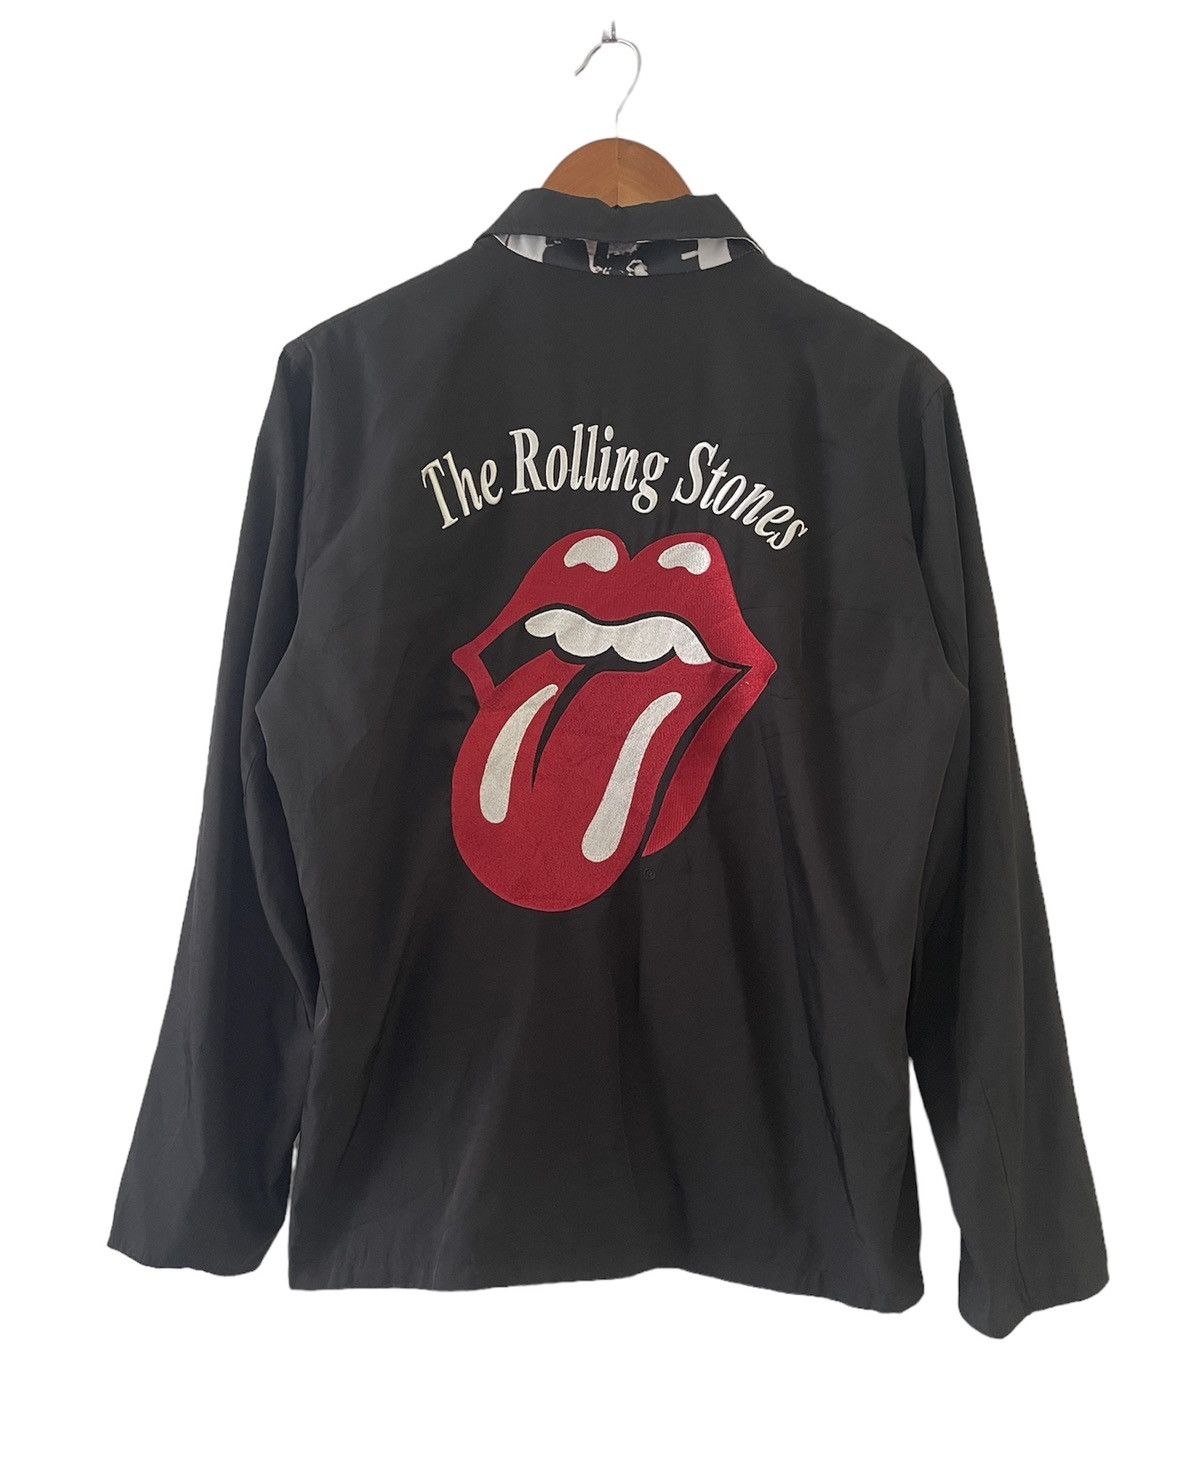 The Rolling Stone By Jack Rose Reversible Jacket - 2